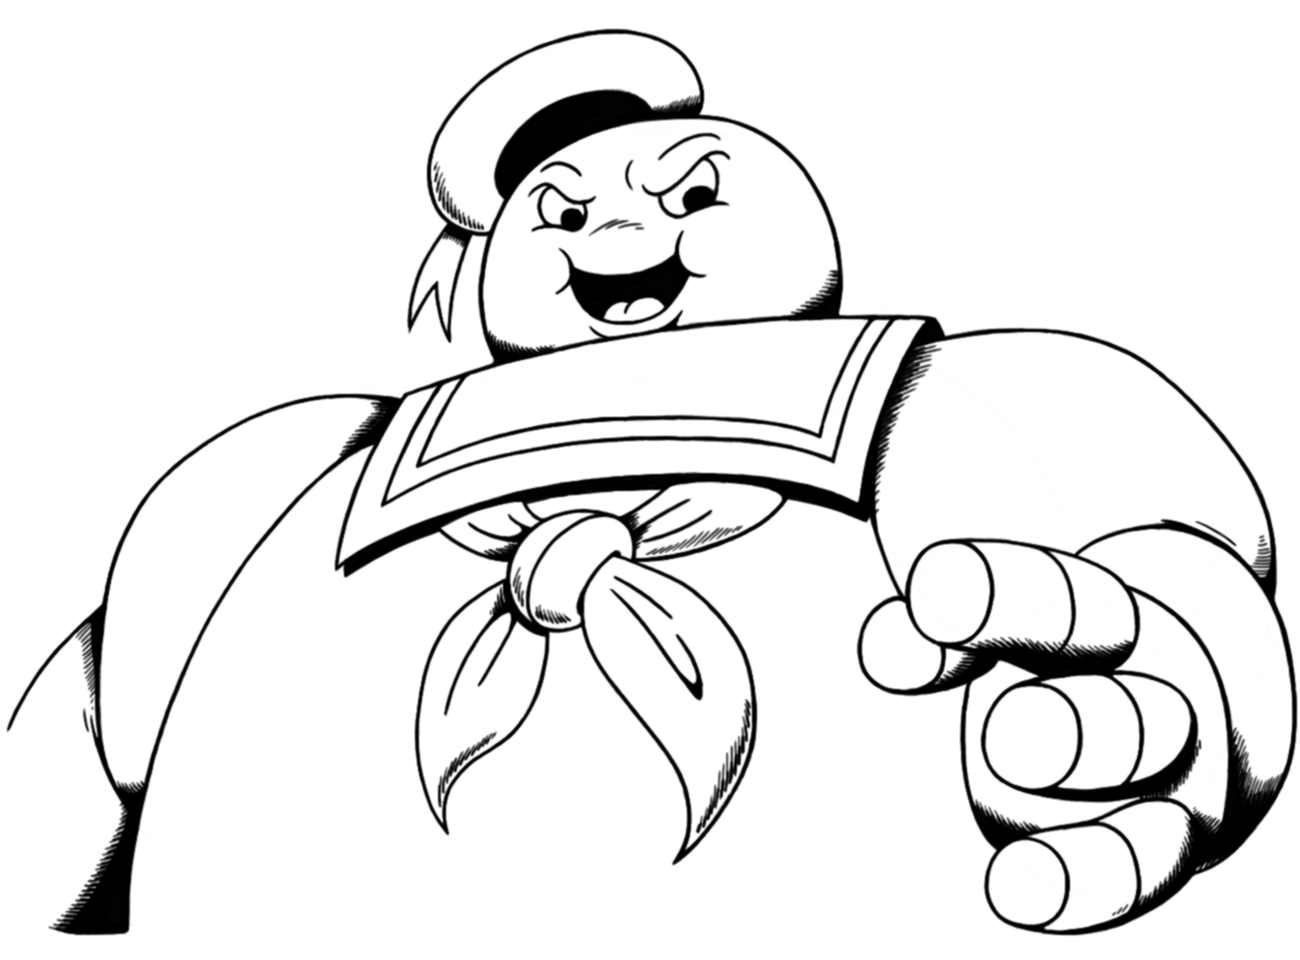 Inktober stay puft marshmallow man by bdtxiii on